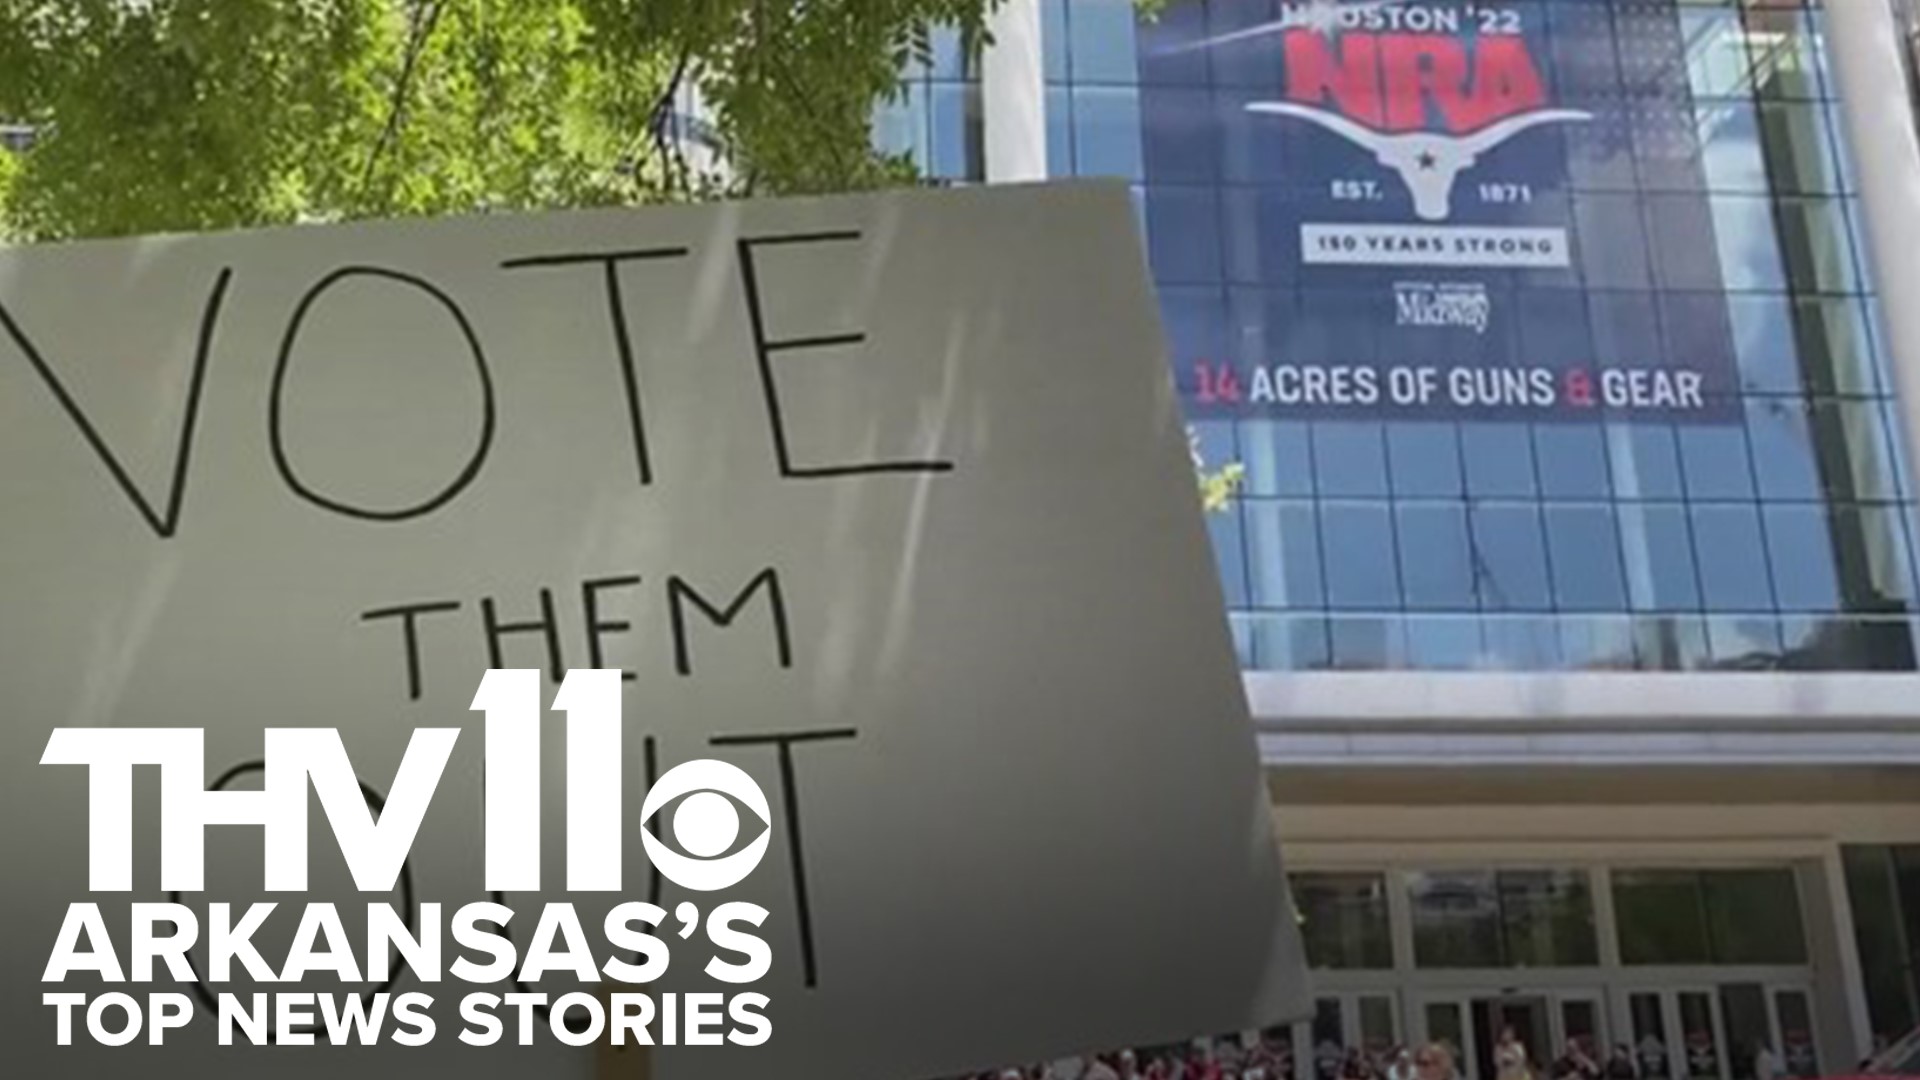 Rolly Hoyt provides the top news stories in Arkansas including gun advocates faced off with protesters over the weekend outside an NRA convention.